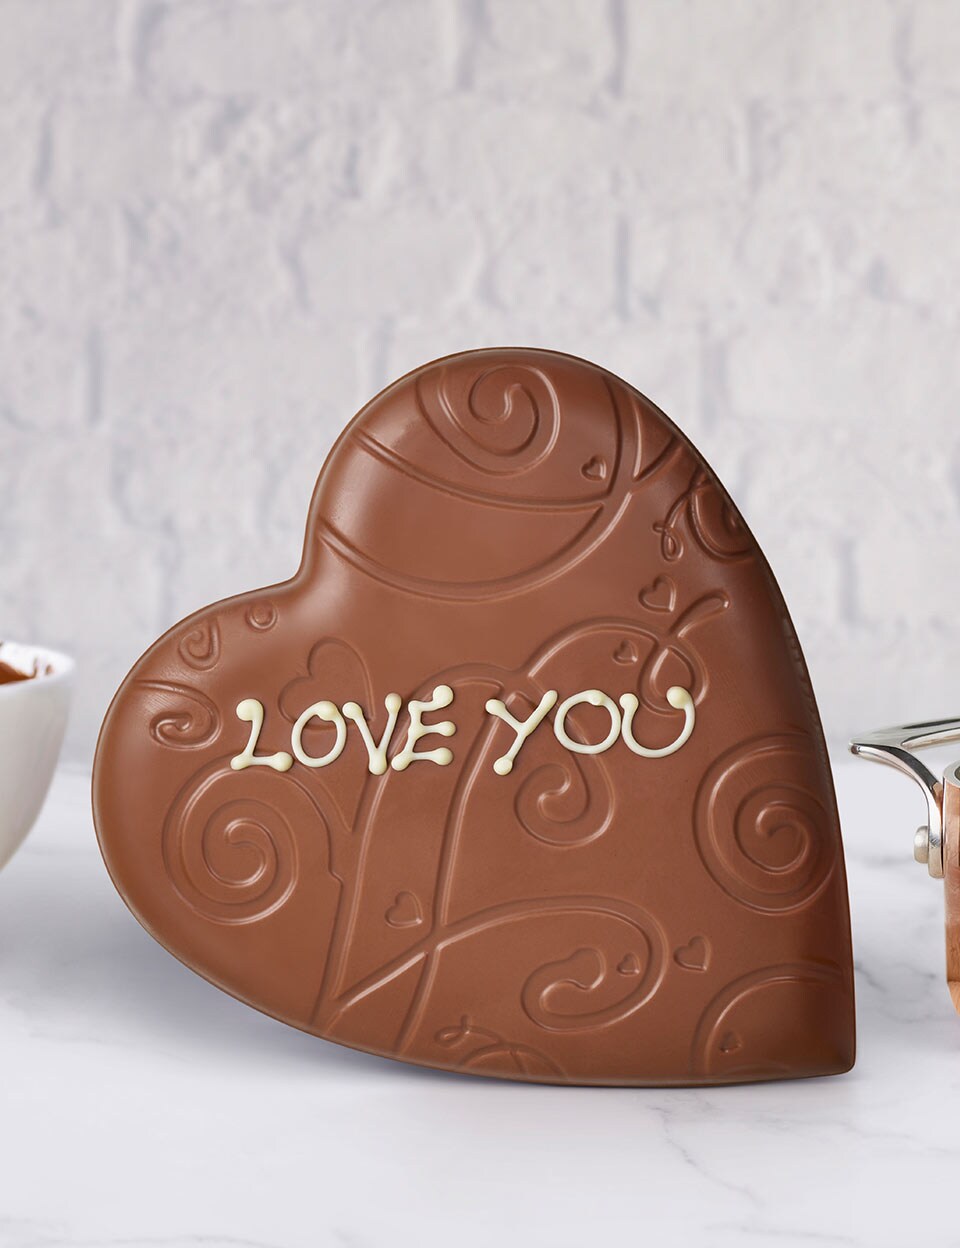 Thorntons chocolate heart iced with I Love You